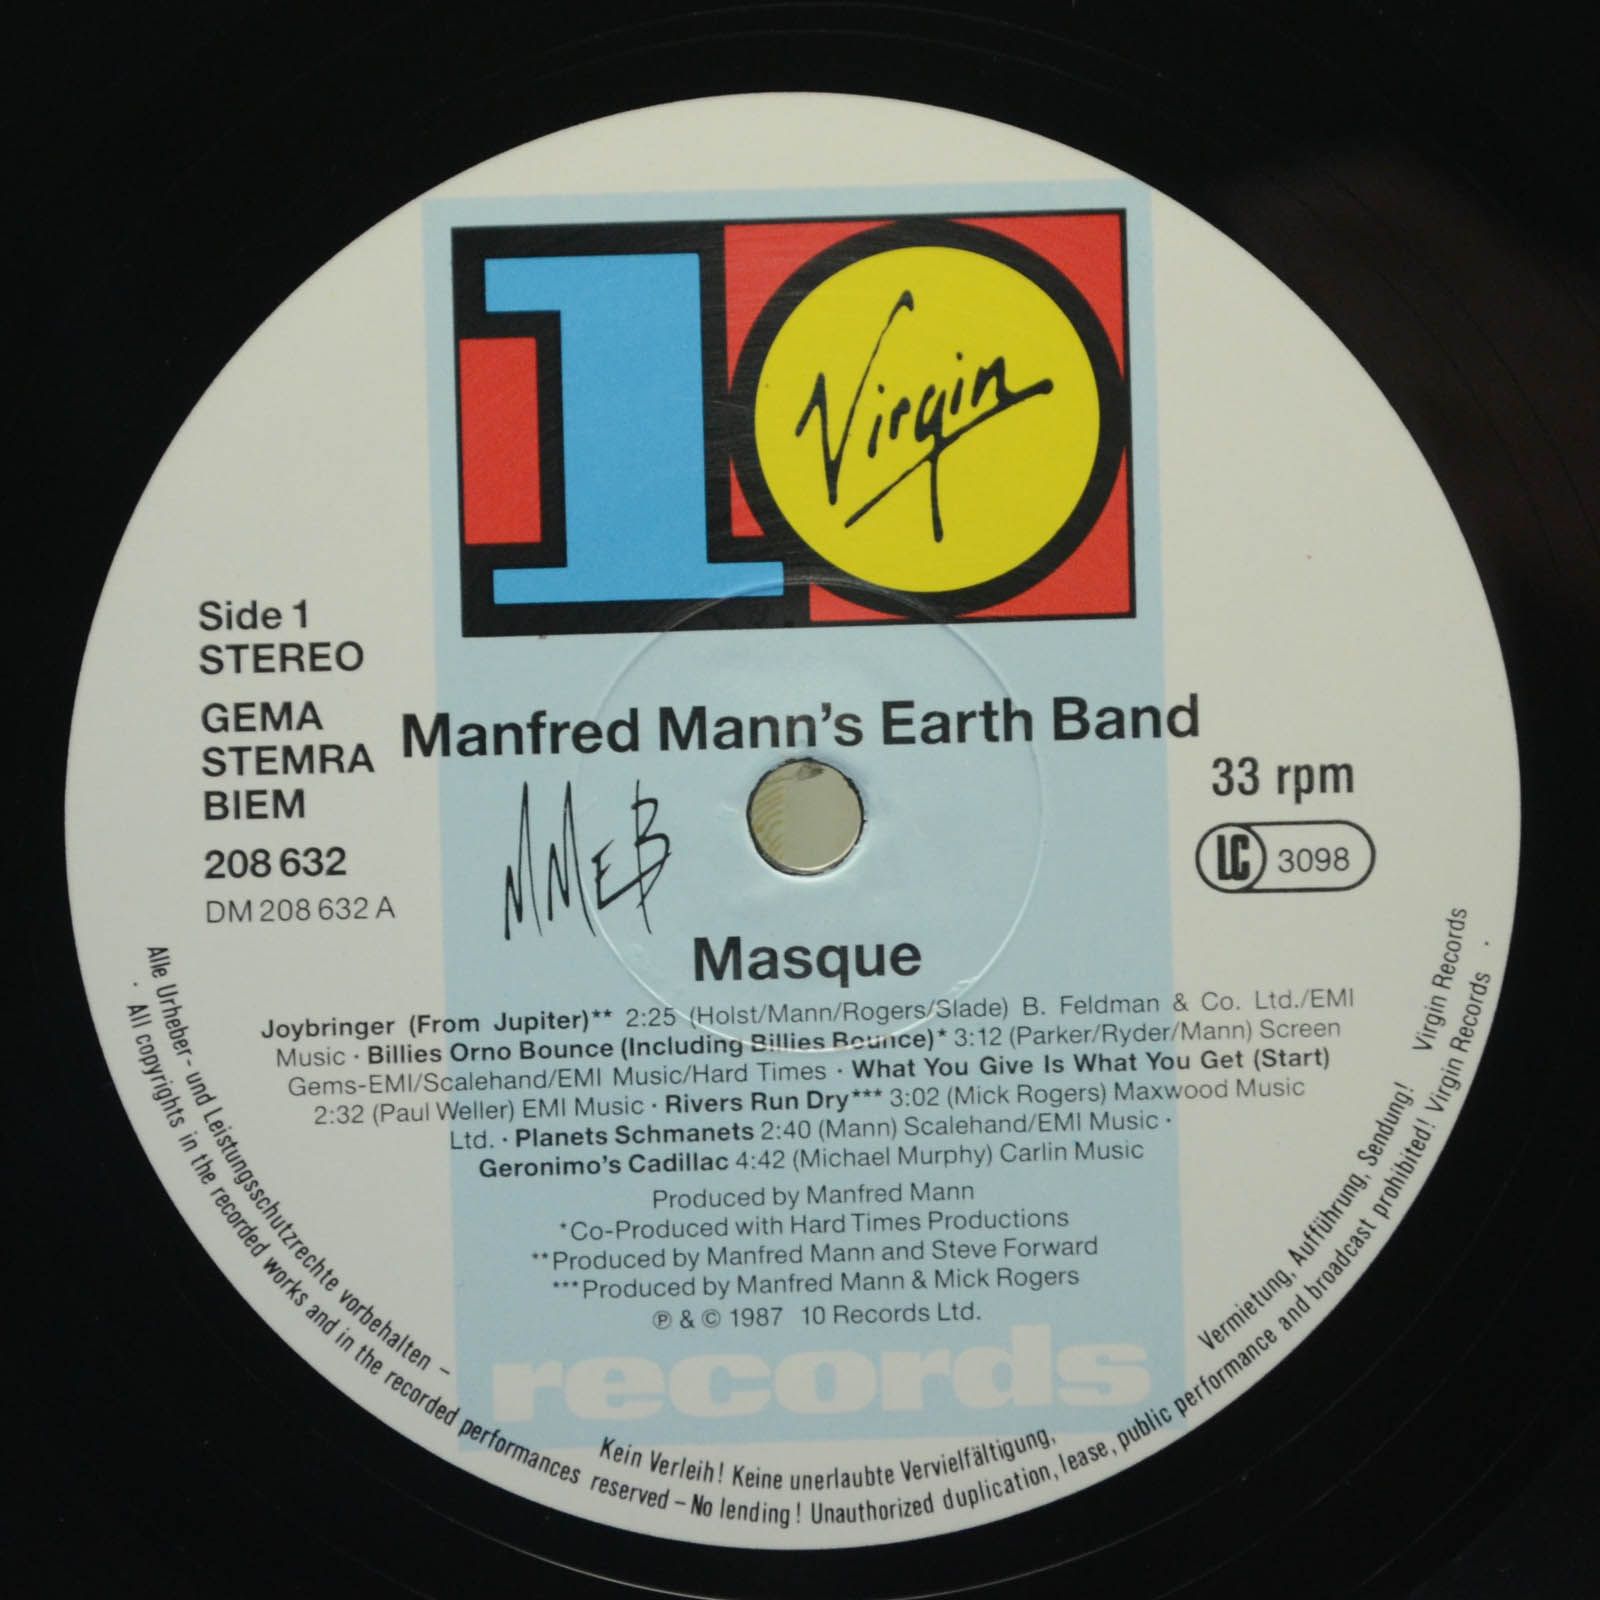 Manfred Mann's Earth Band — Masque (Songs And Planets), 1987